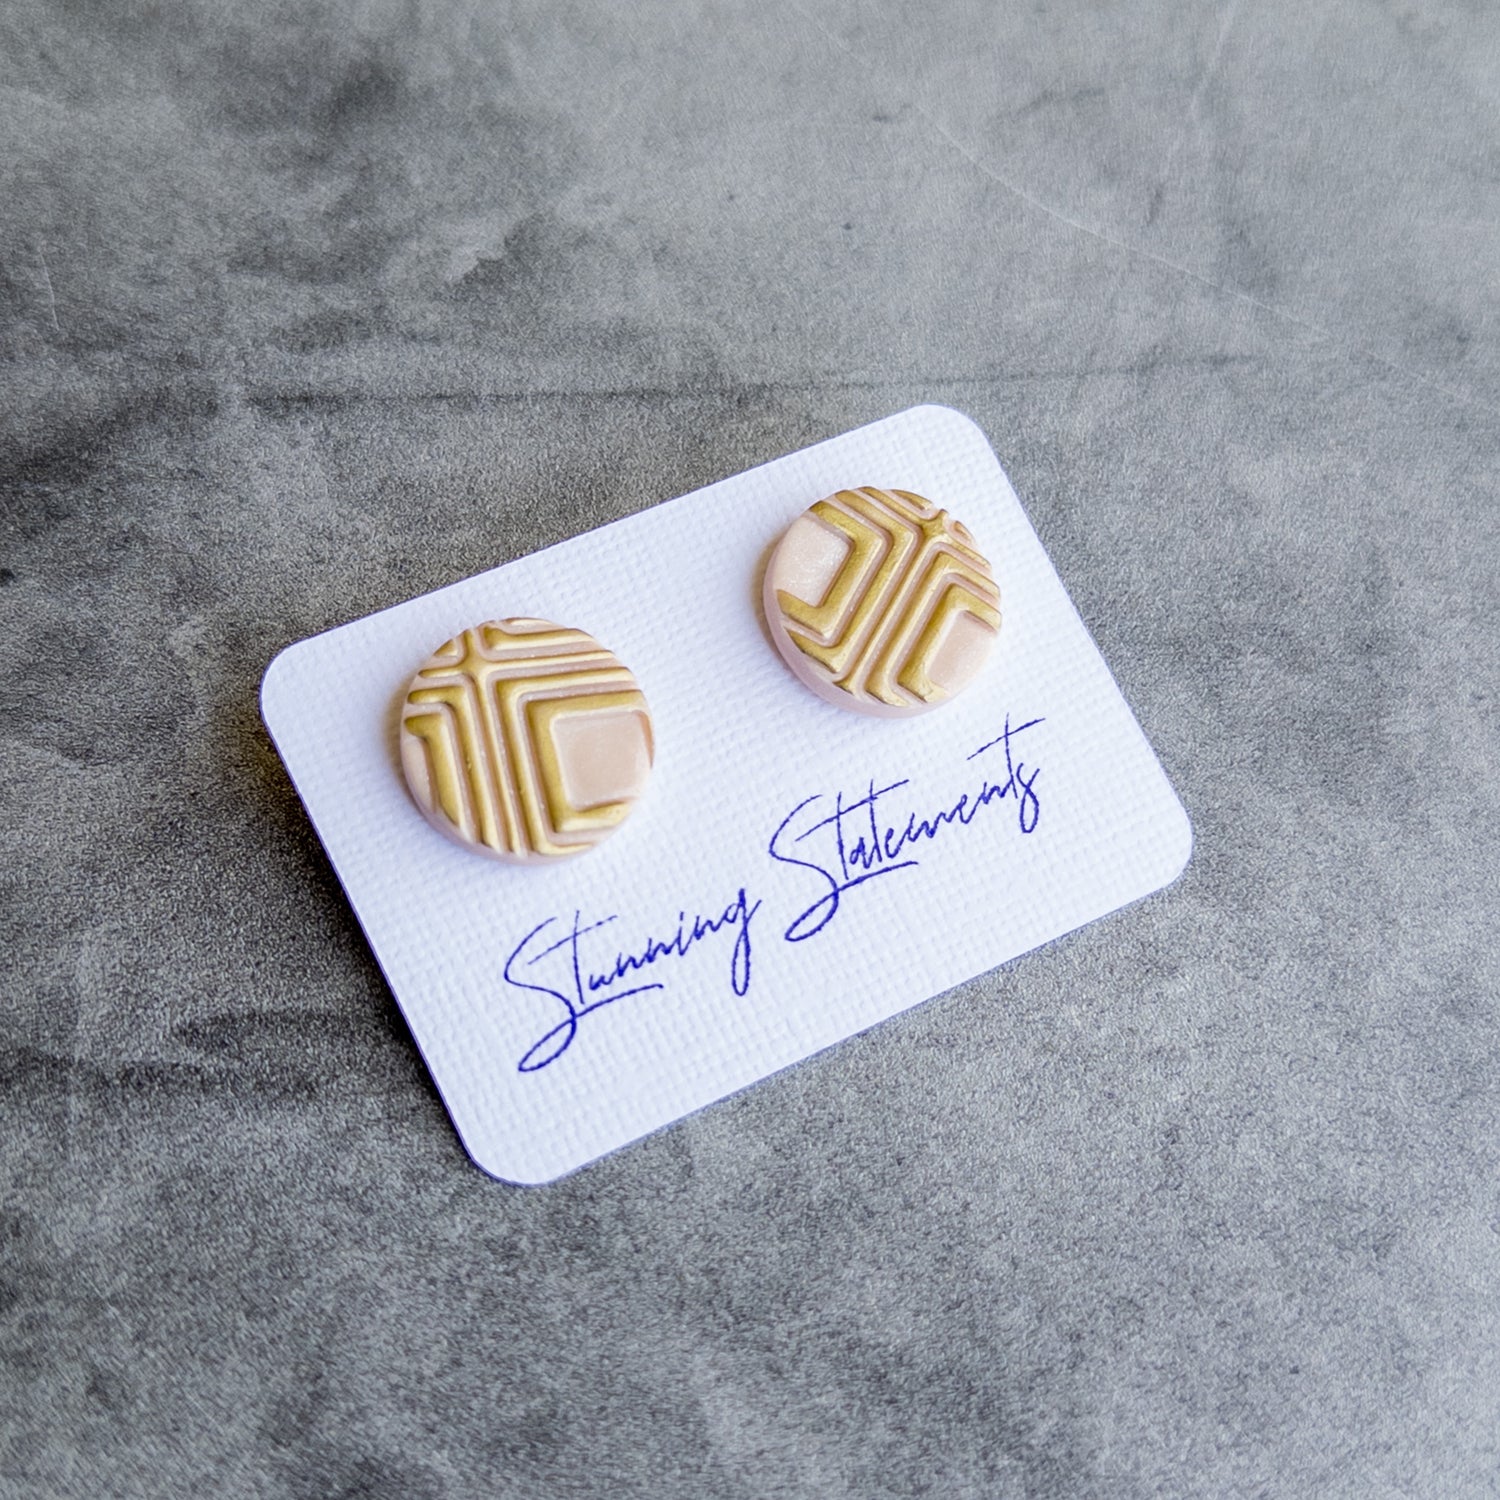 stunning statements textured bright bold colorful cream off white cleo stud earrings